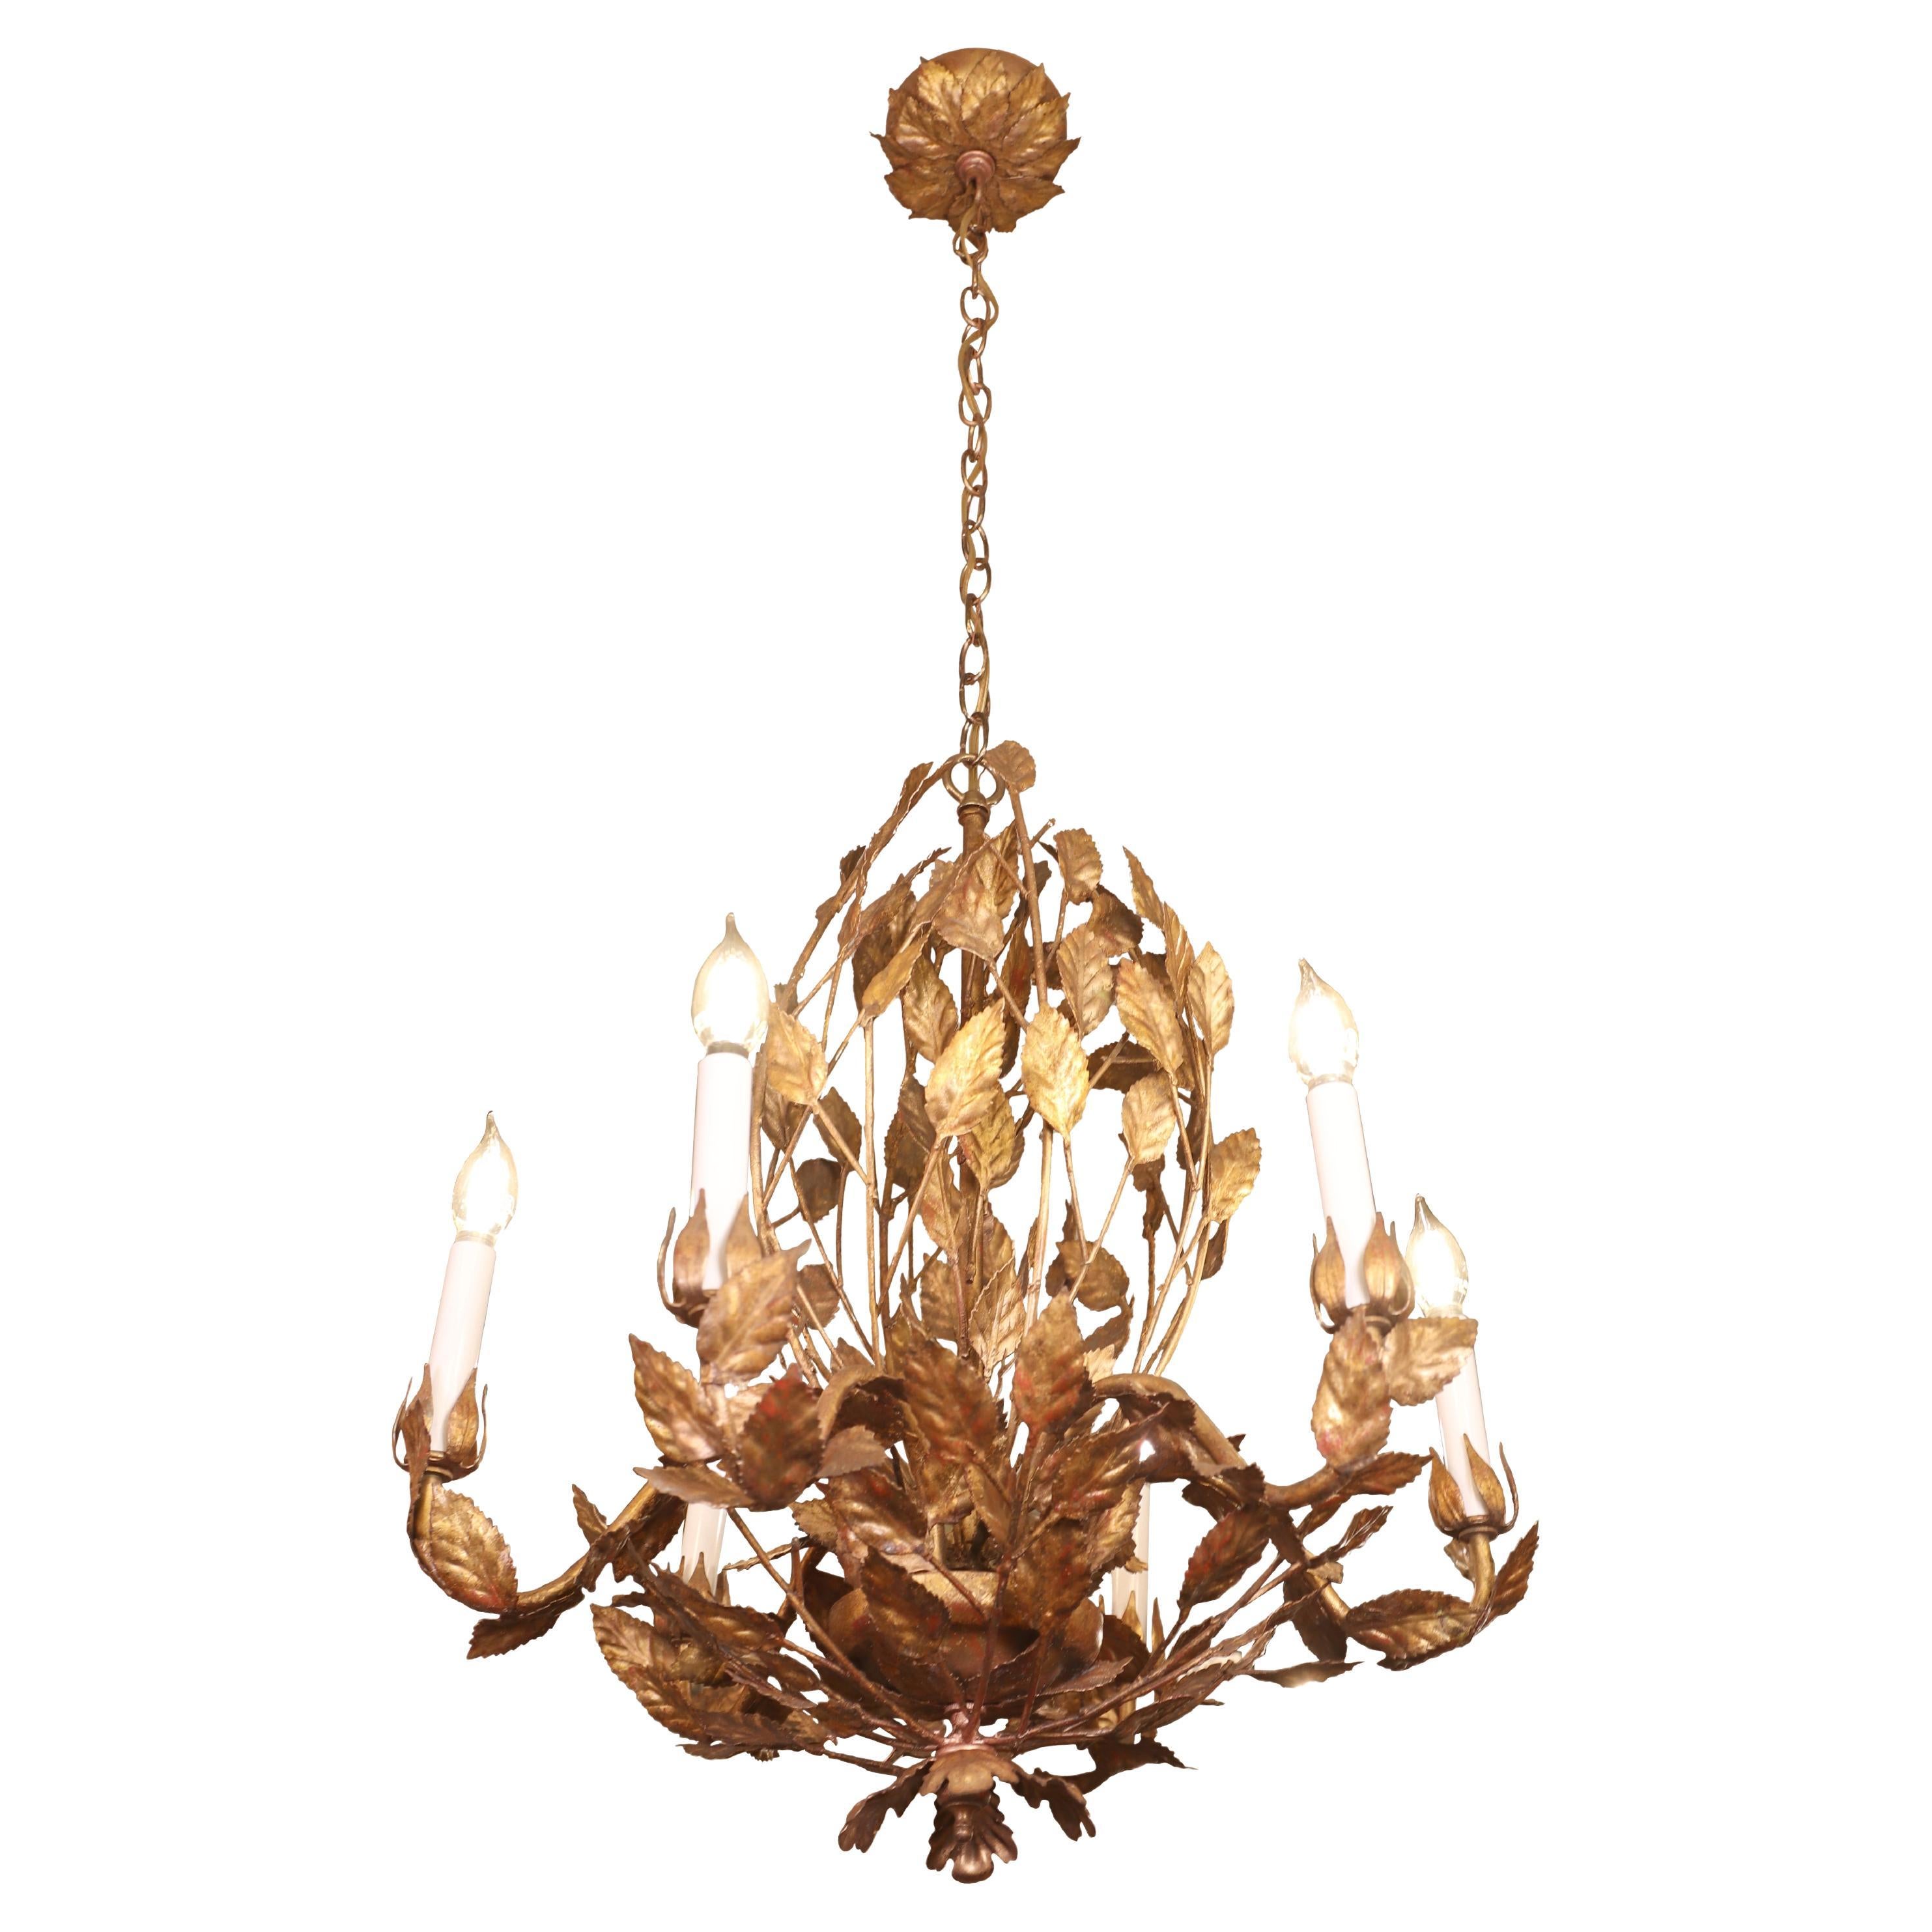 Restored Gilded Leaves 6 Light Chandelier Done in a Tole Style